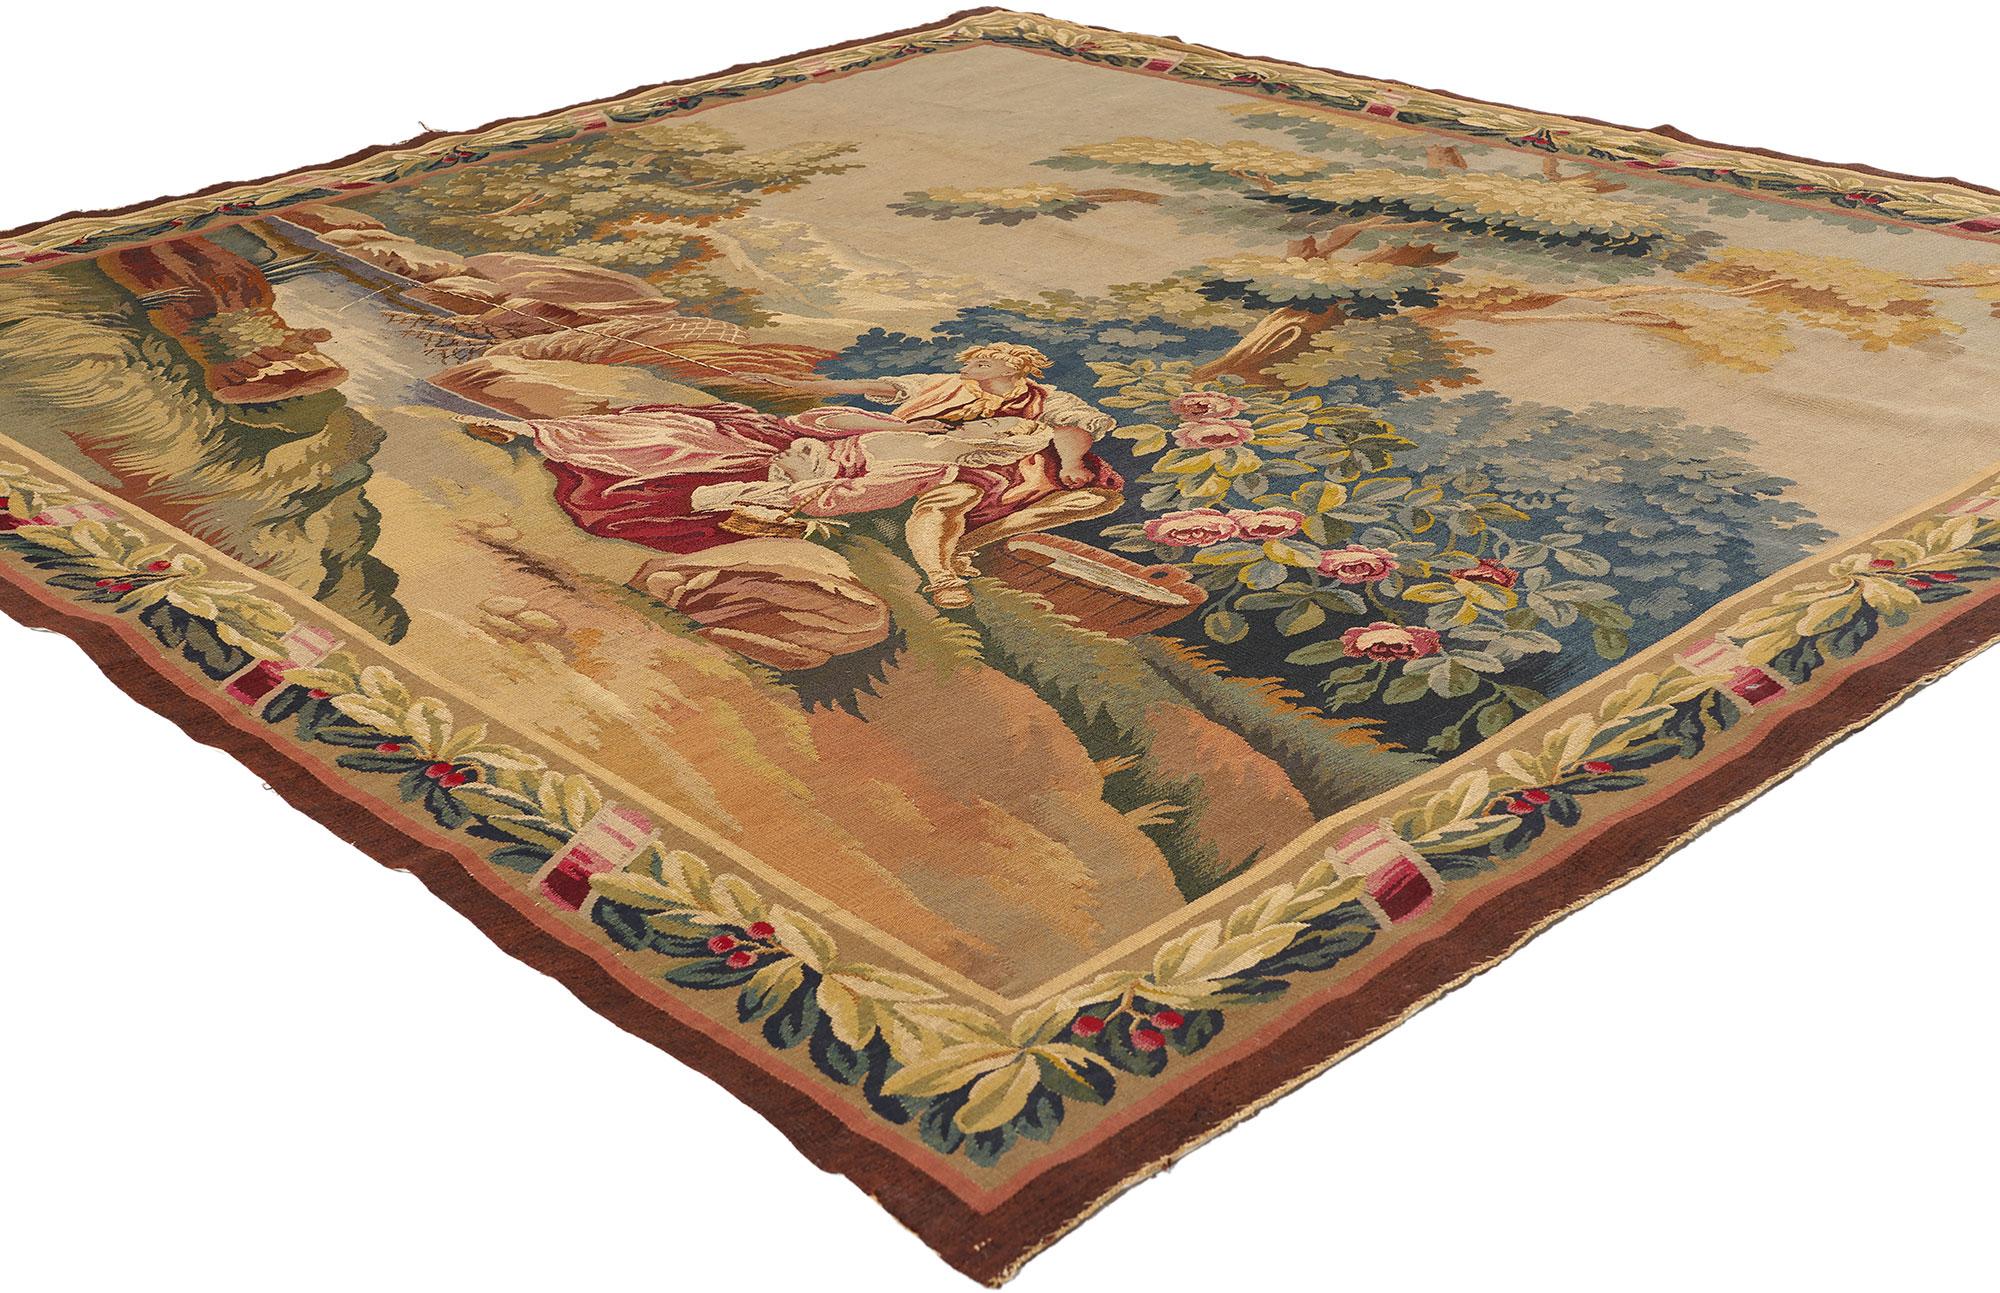 77257 Antique French Aubusson Tapestry, 06'08 x 07'01. Nestled within the quaint confines of Aubusson, France, French Aubusson tapestries have mesmerized connoisseurs since the 14th century, their allure enduring through the ages. Employing the